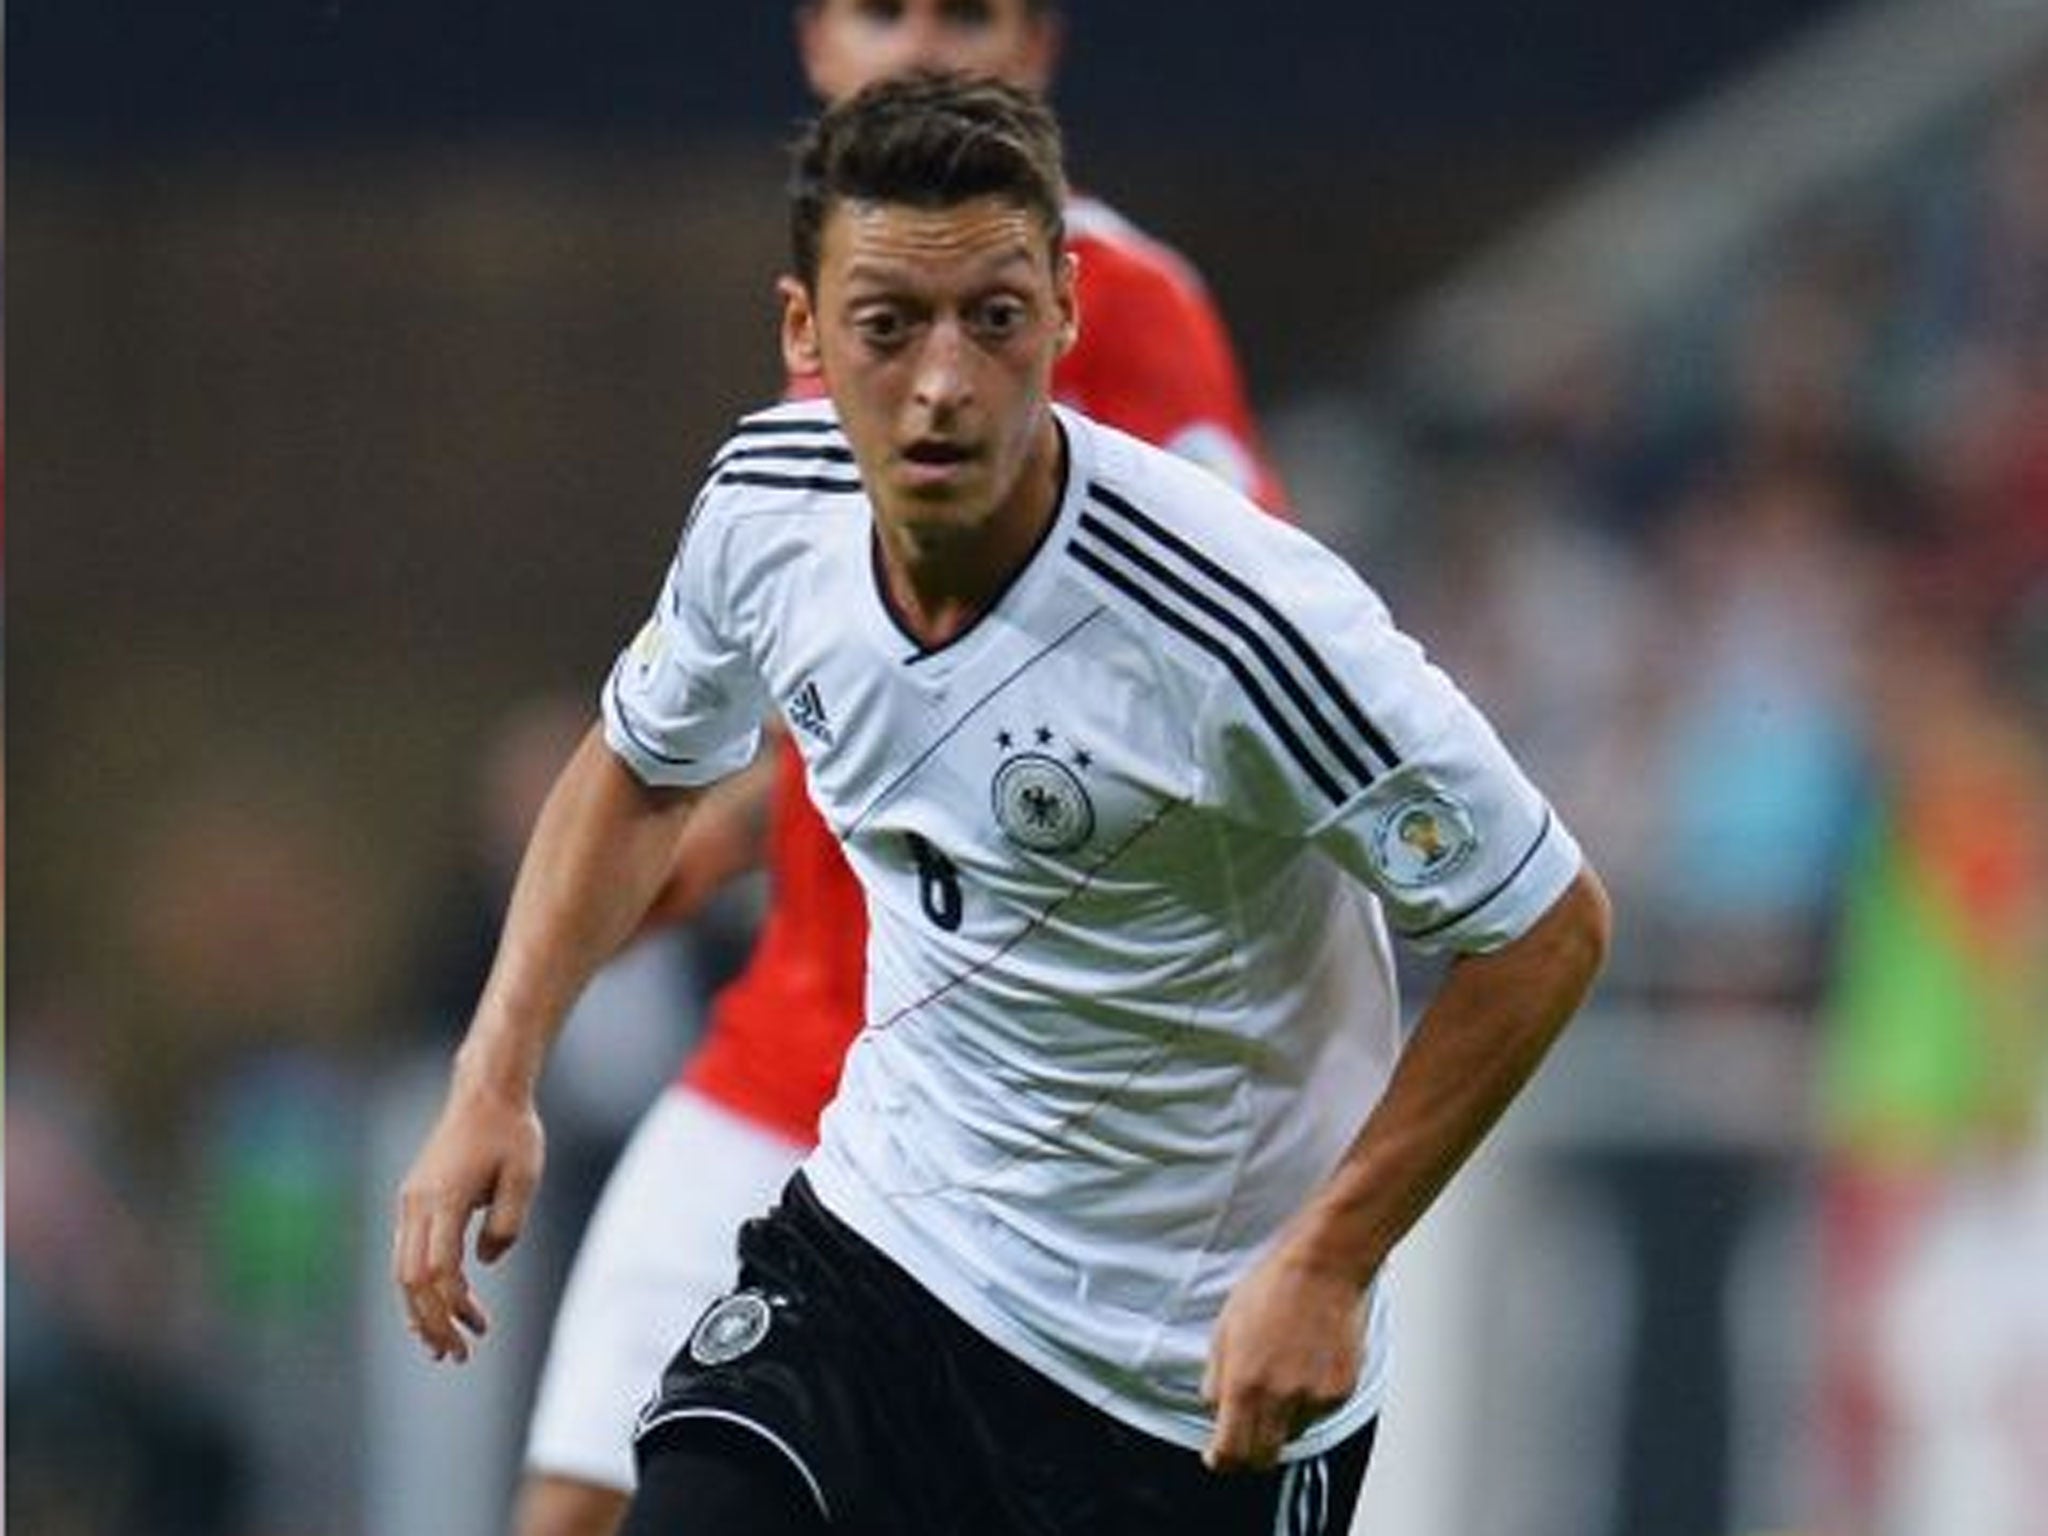 Teutonic night: Mesut Ozil takes centre stage to inspire Germany to a 3-0 victory against Austria in Munich on Friday